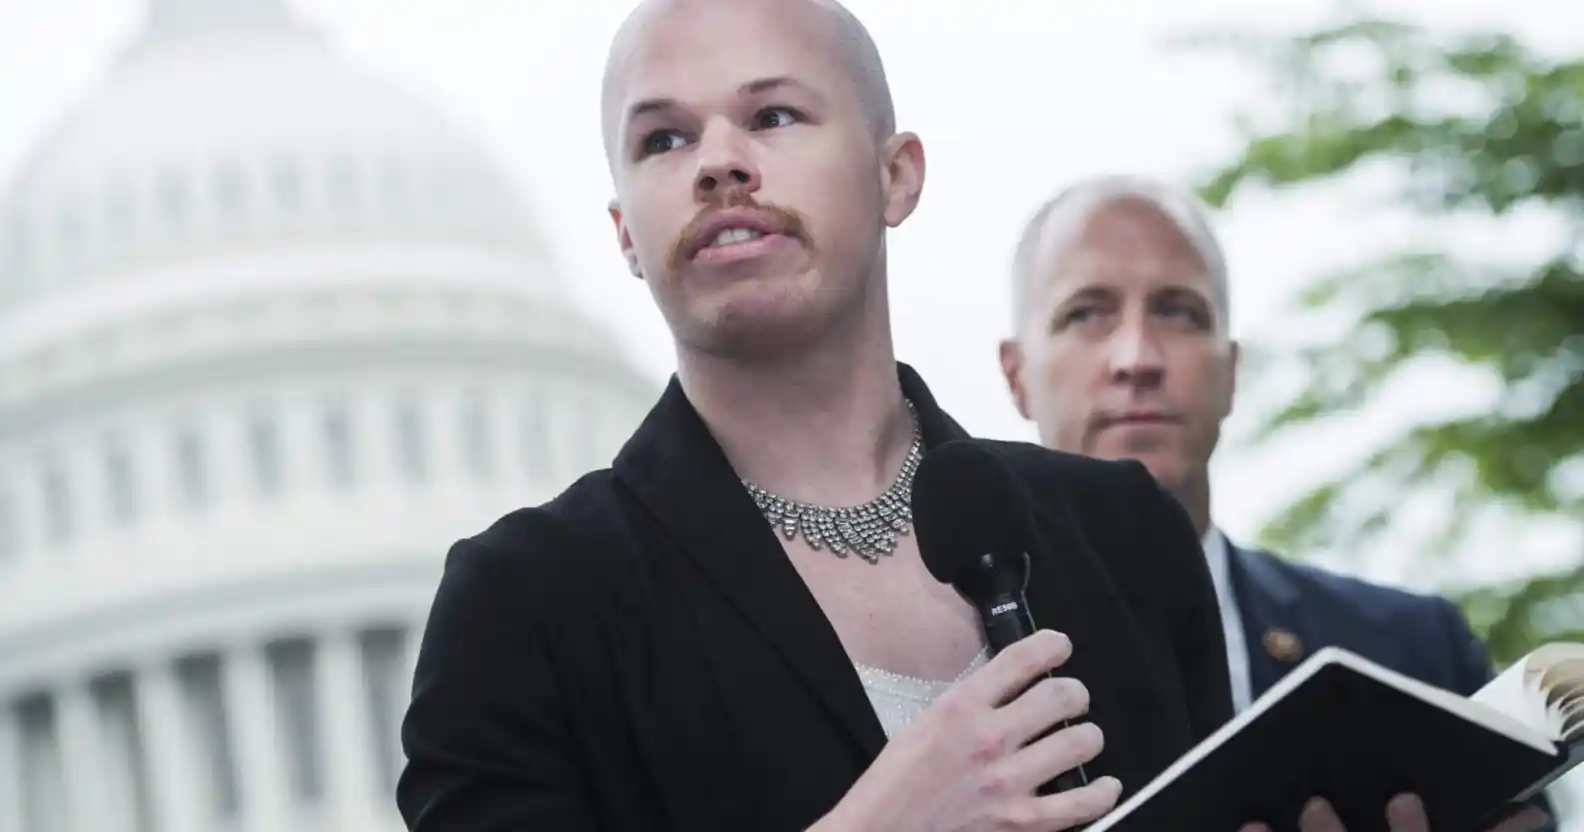 Sam Brinton wearing a woman's suit jacket with necklace speaks outside the US capitol